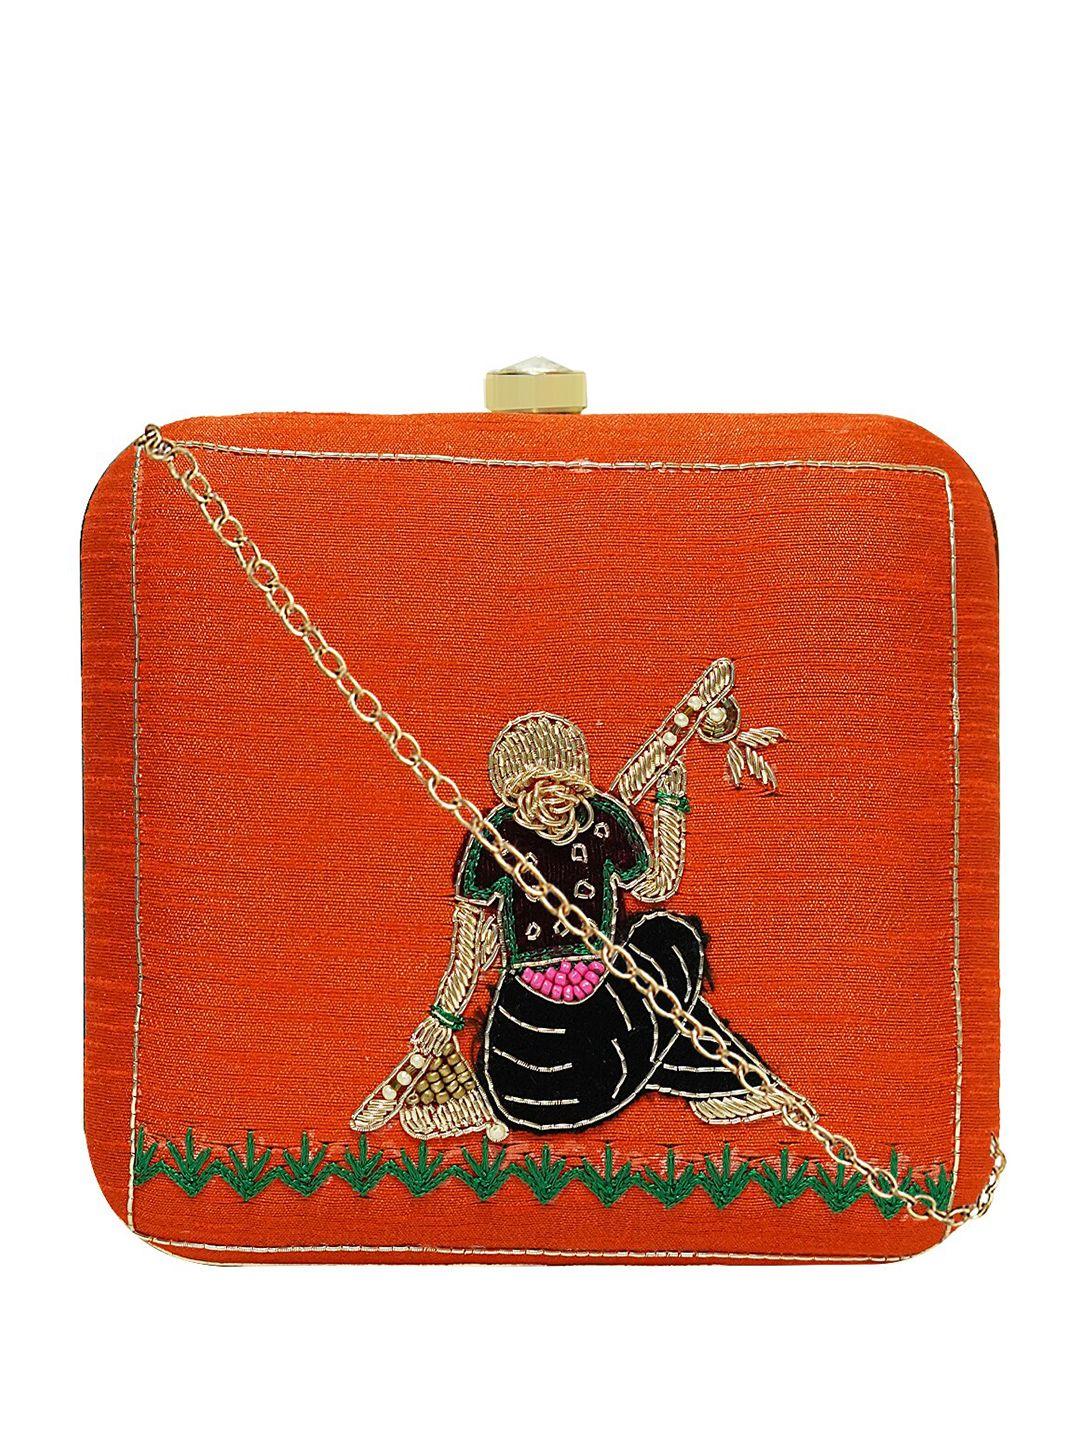 horra embroidered box clutch